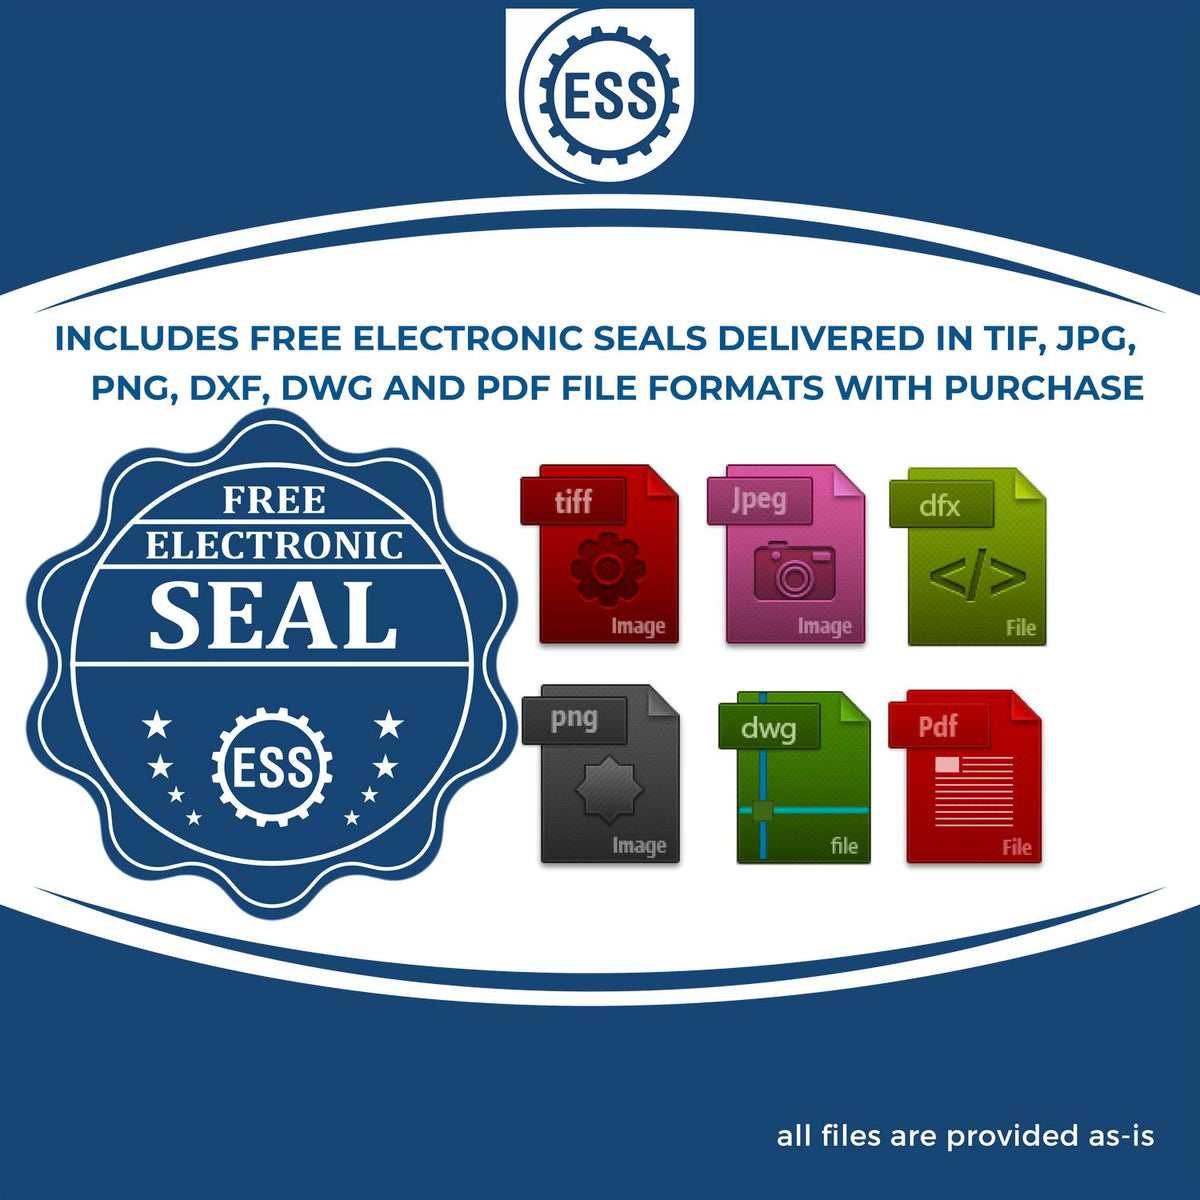 An infographic for the free electronic seal for the Slim Pre-Inked Wisconsin Land Surveyor Seal Stamp illustrating the different file type icons such as DXF, DWG, TIF, JPG and PNG.